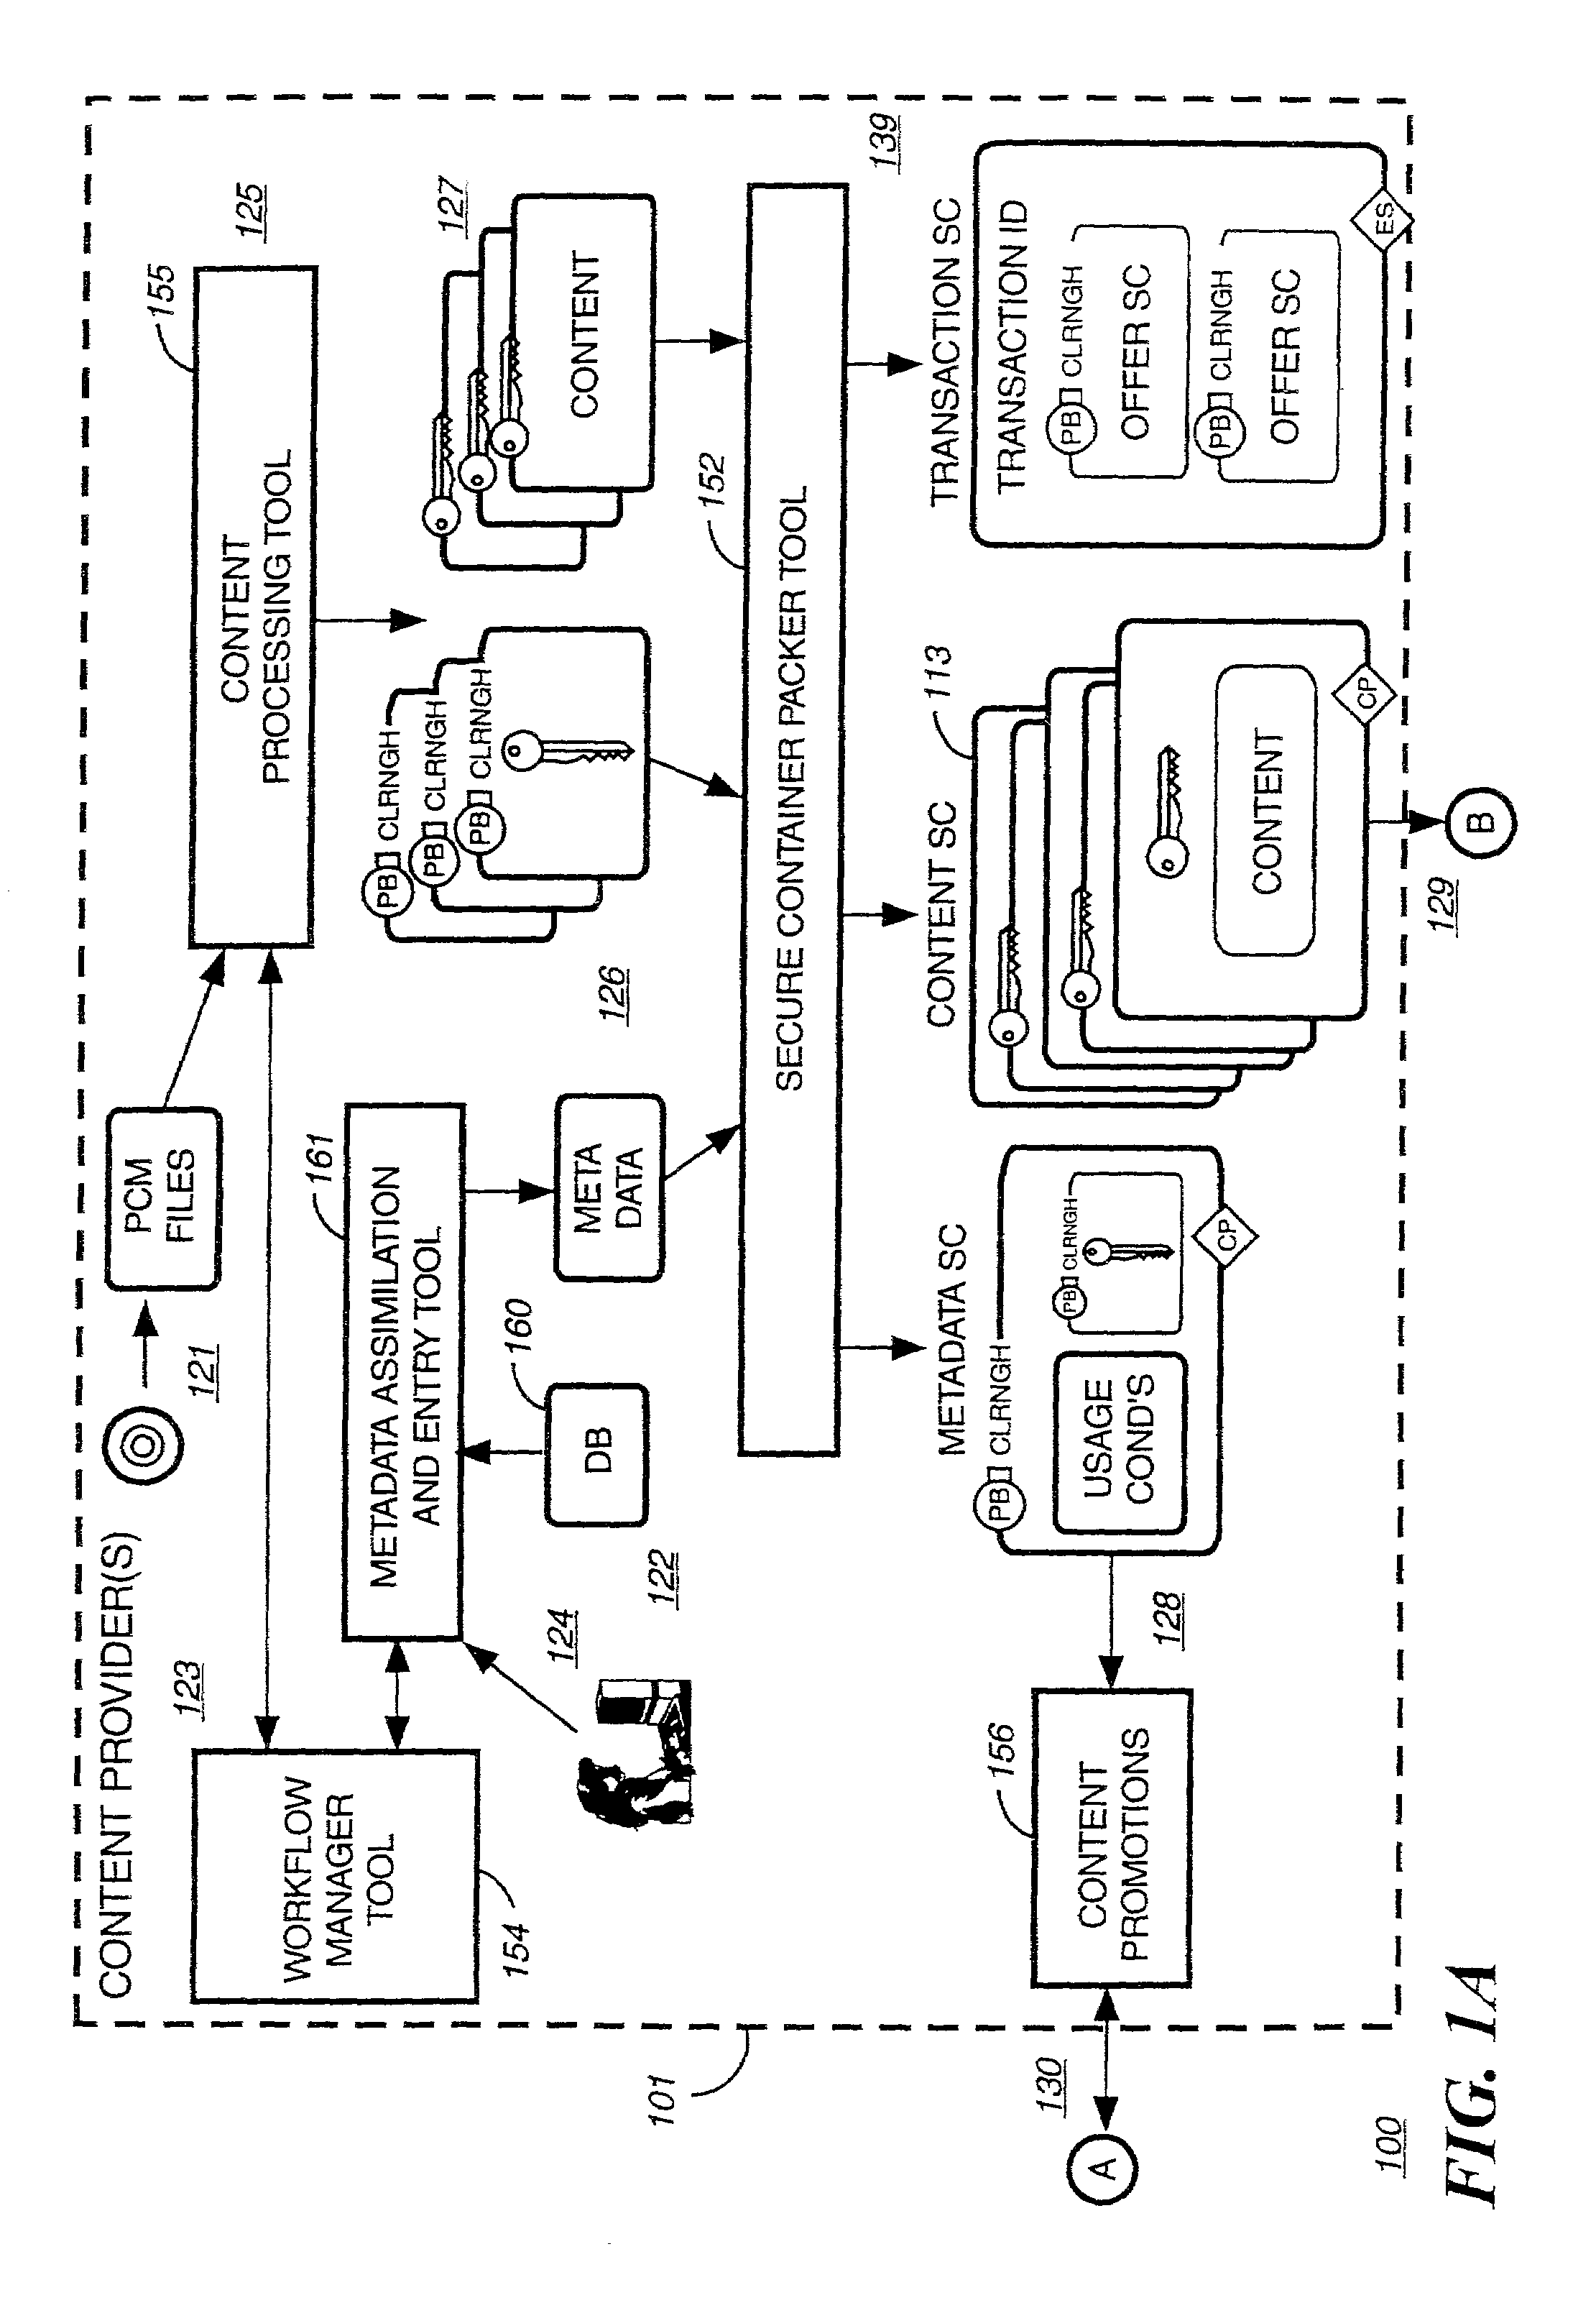 Method and system for securing local database file of local content stored on end-user system